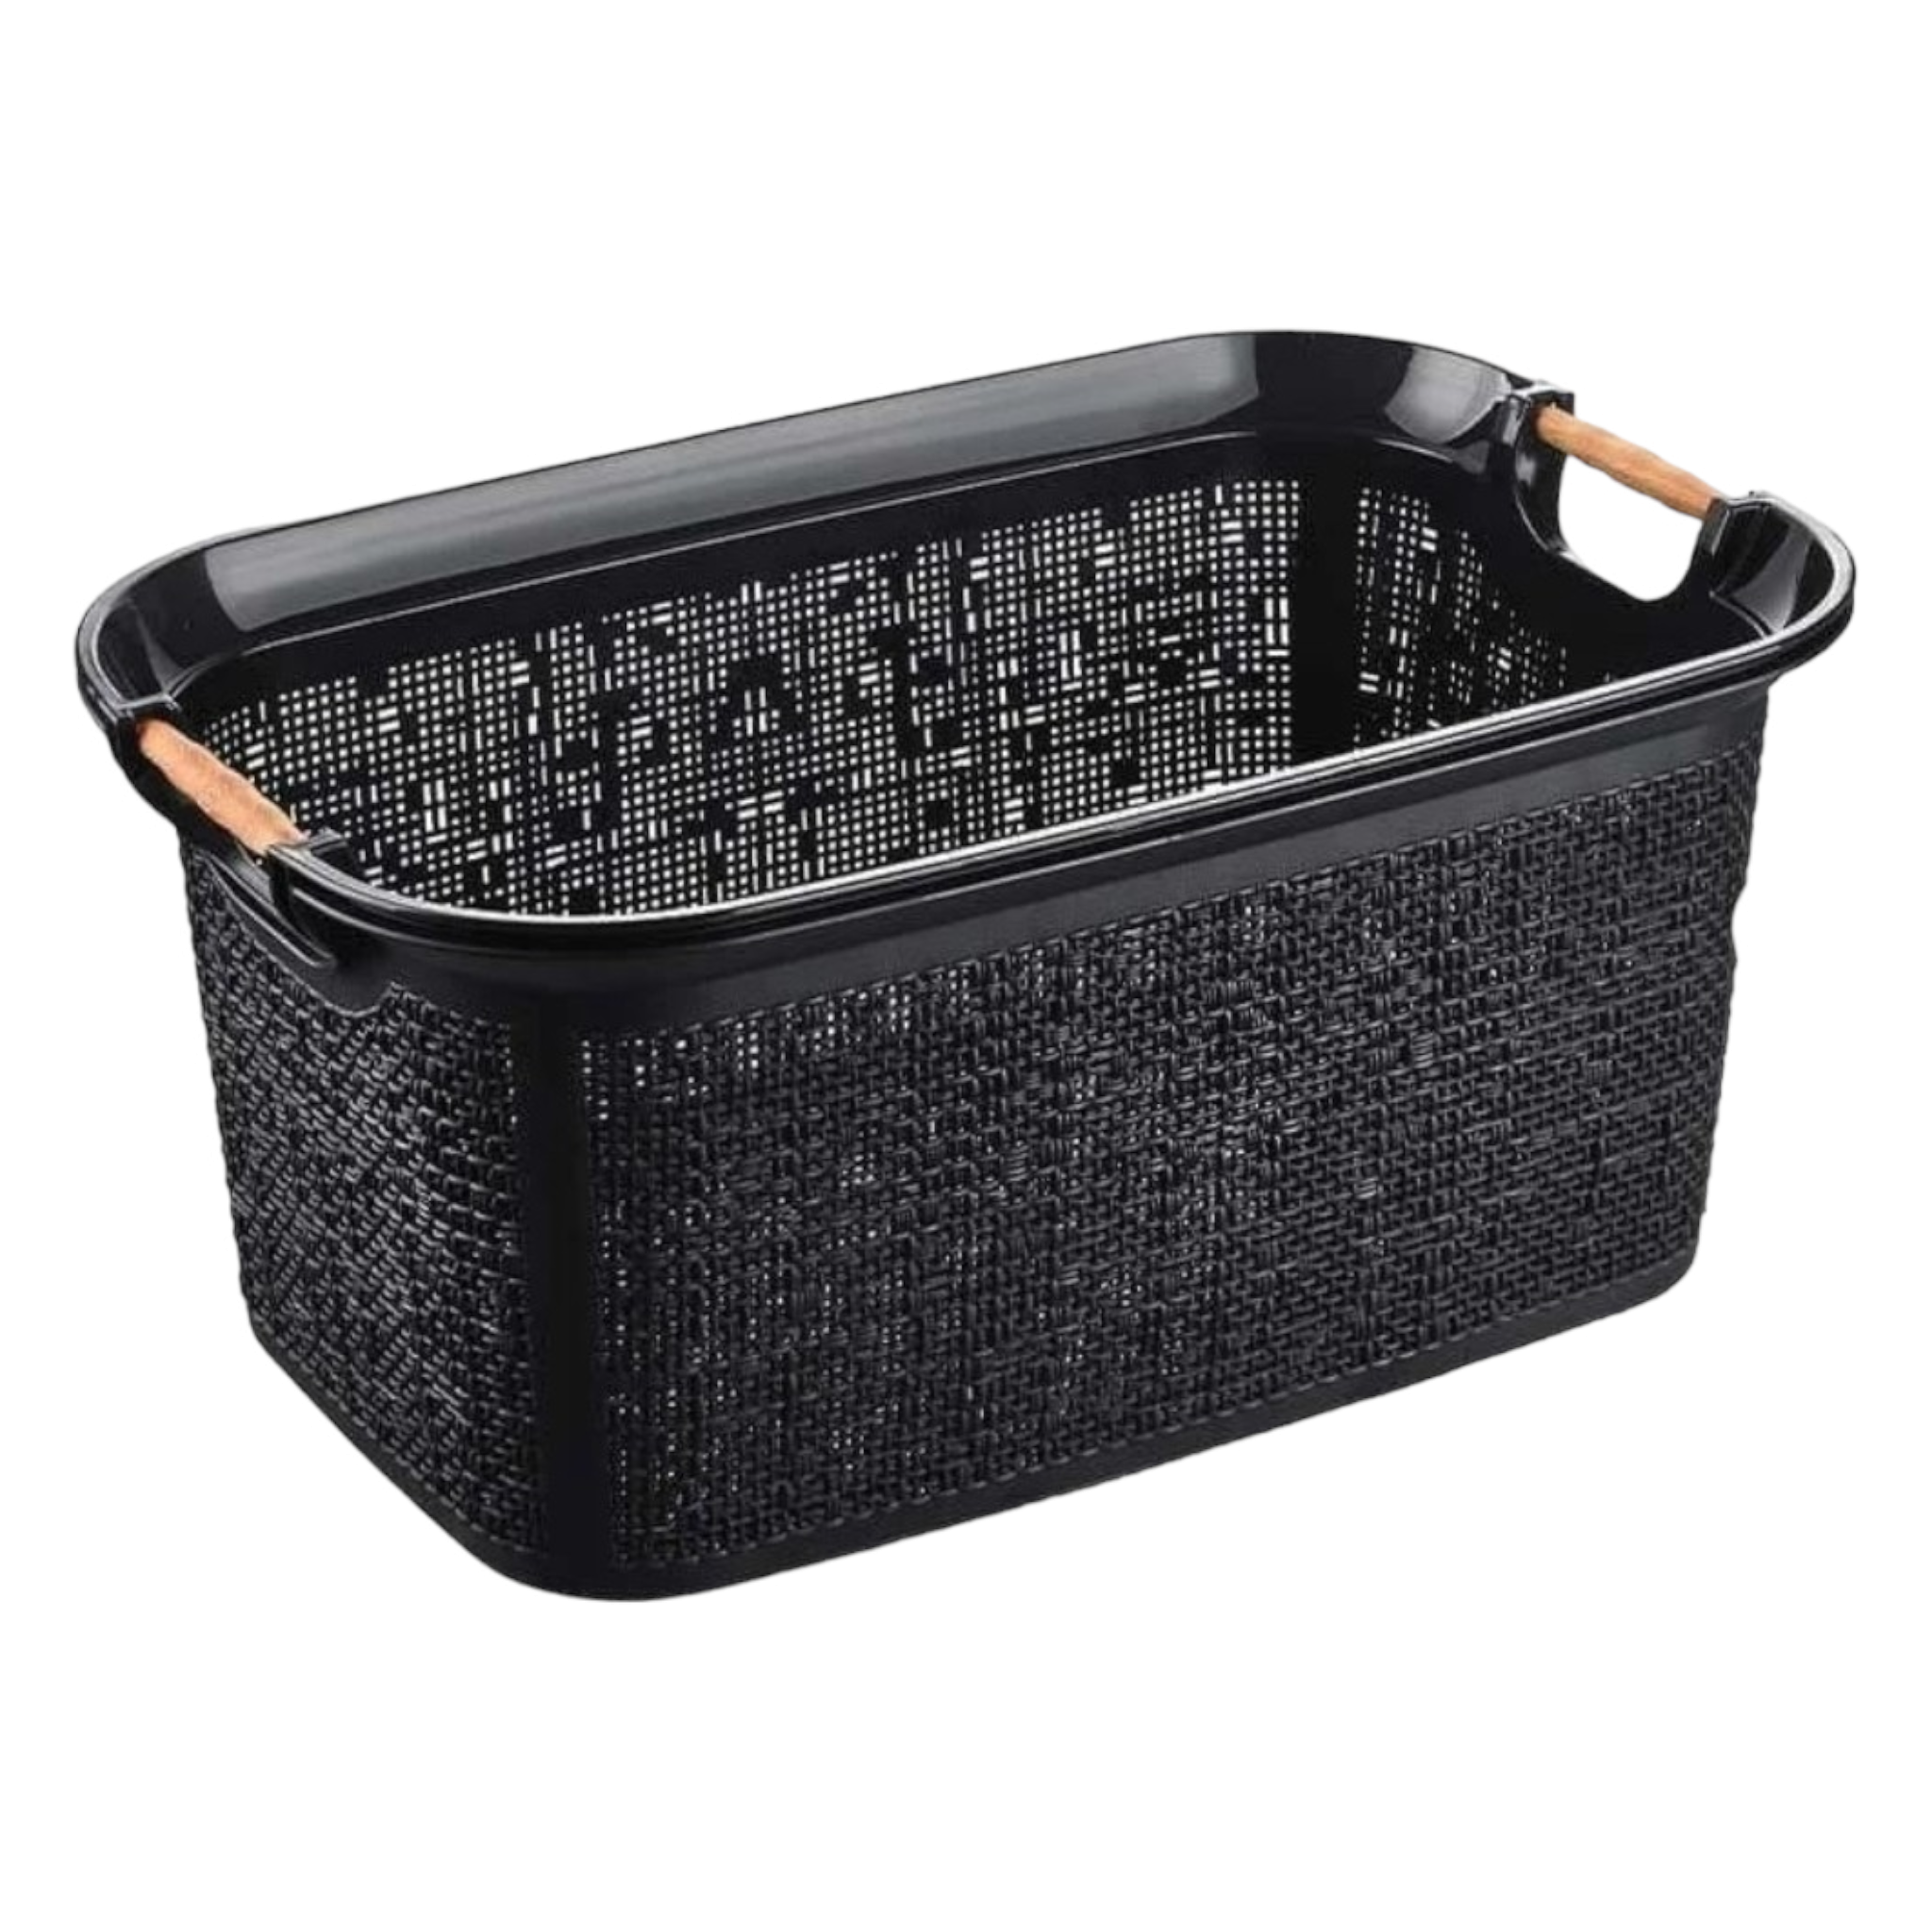 Nu Ware Plastic Woow Design Organizing Laundry Basket wooden Handle IC-TP622